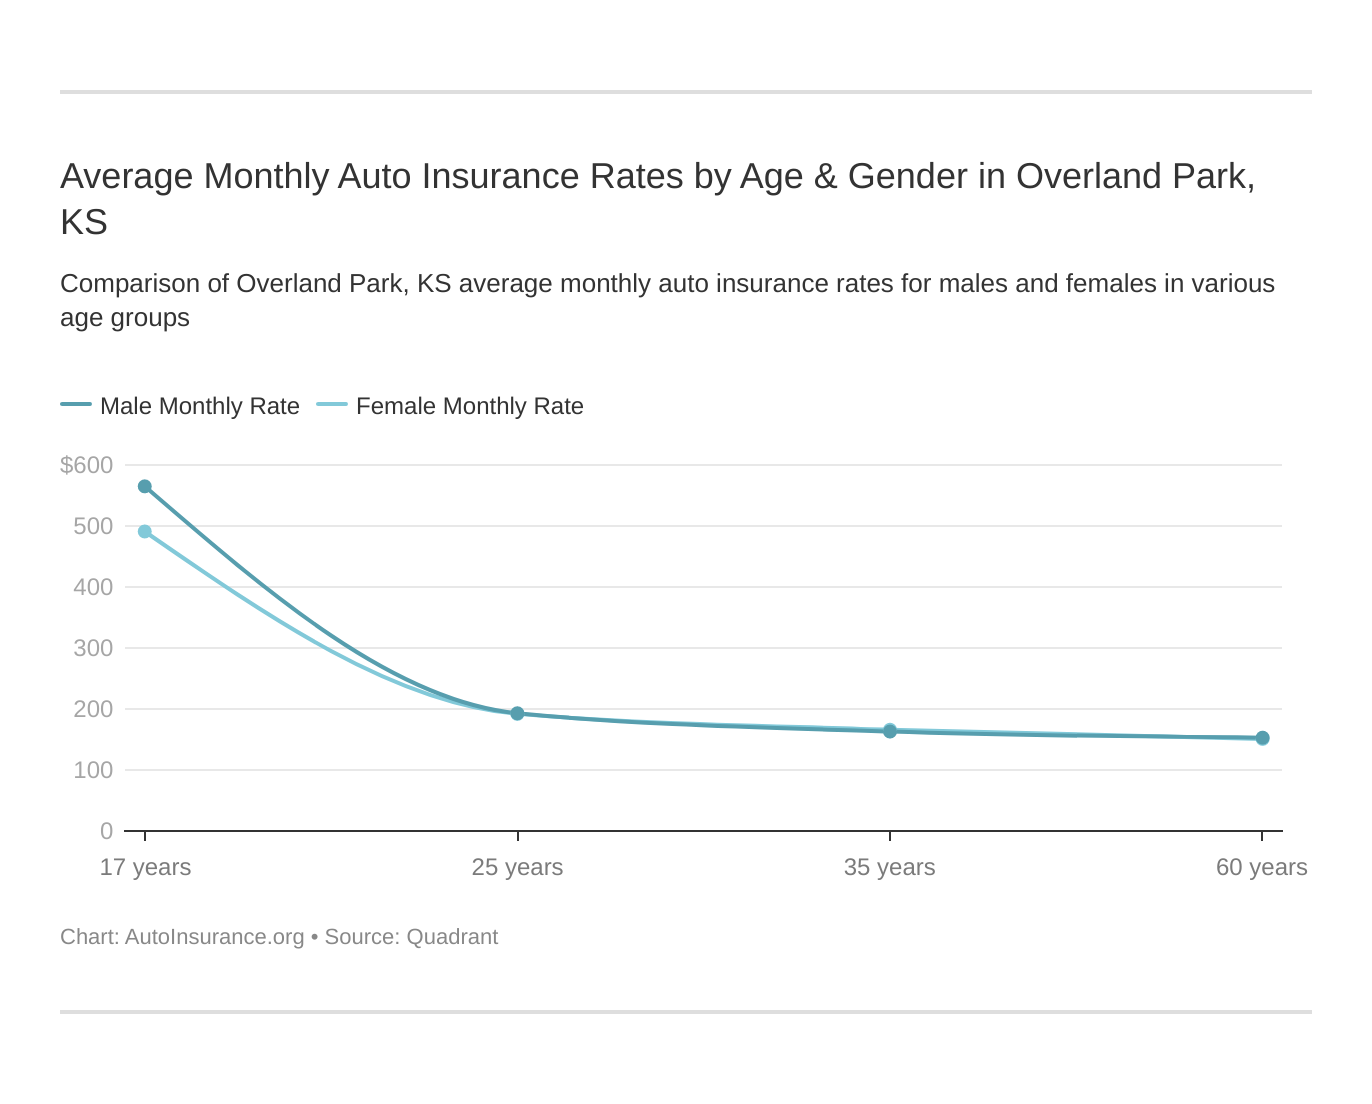 Average Monthly Auto Insurance Rates by Age & Gender in Overland Park, KS